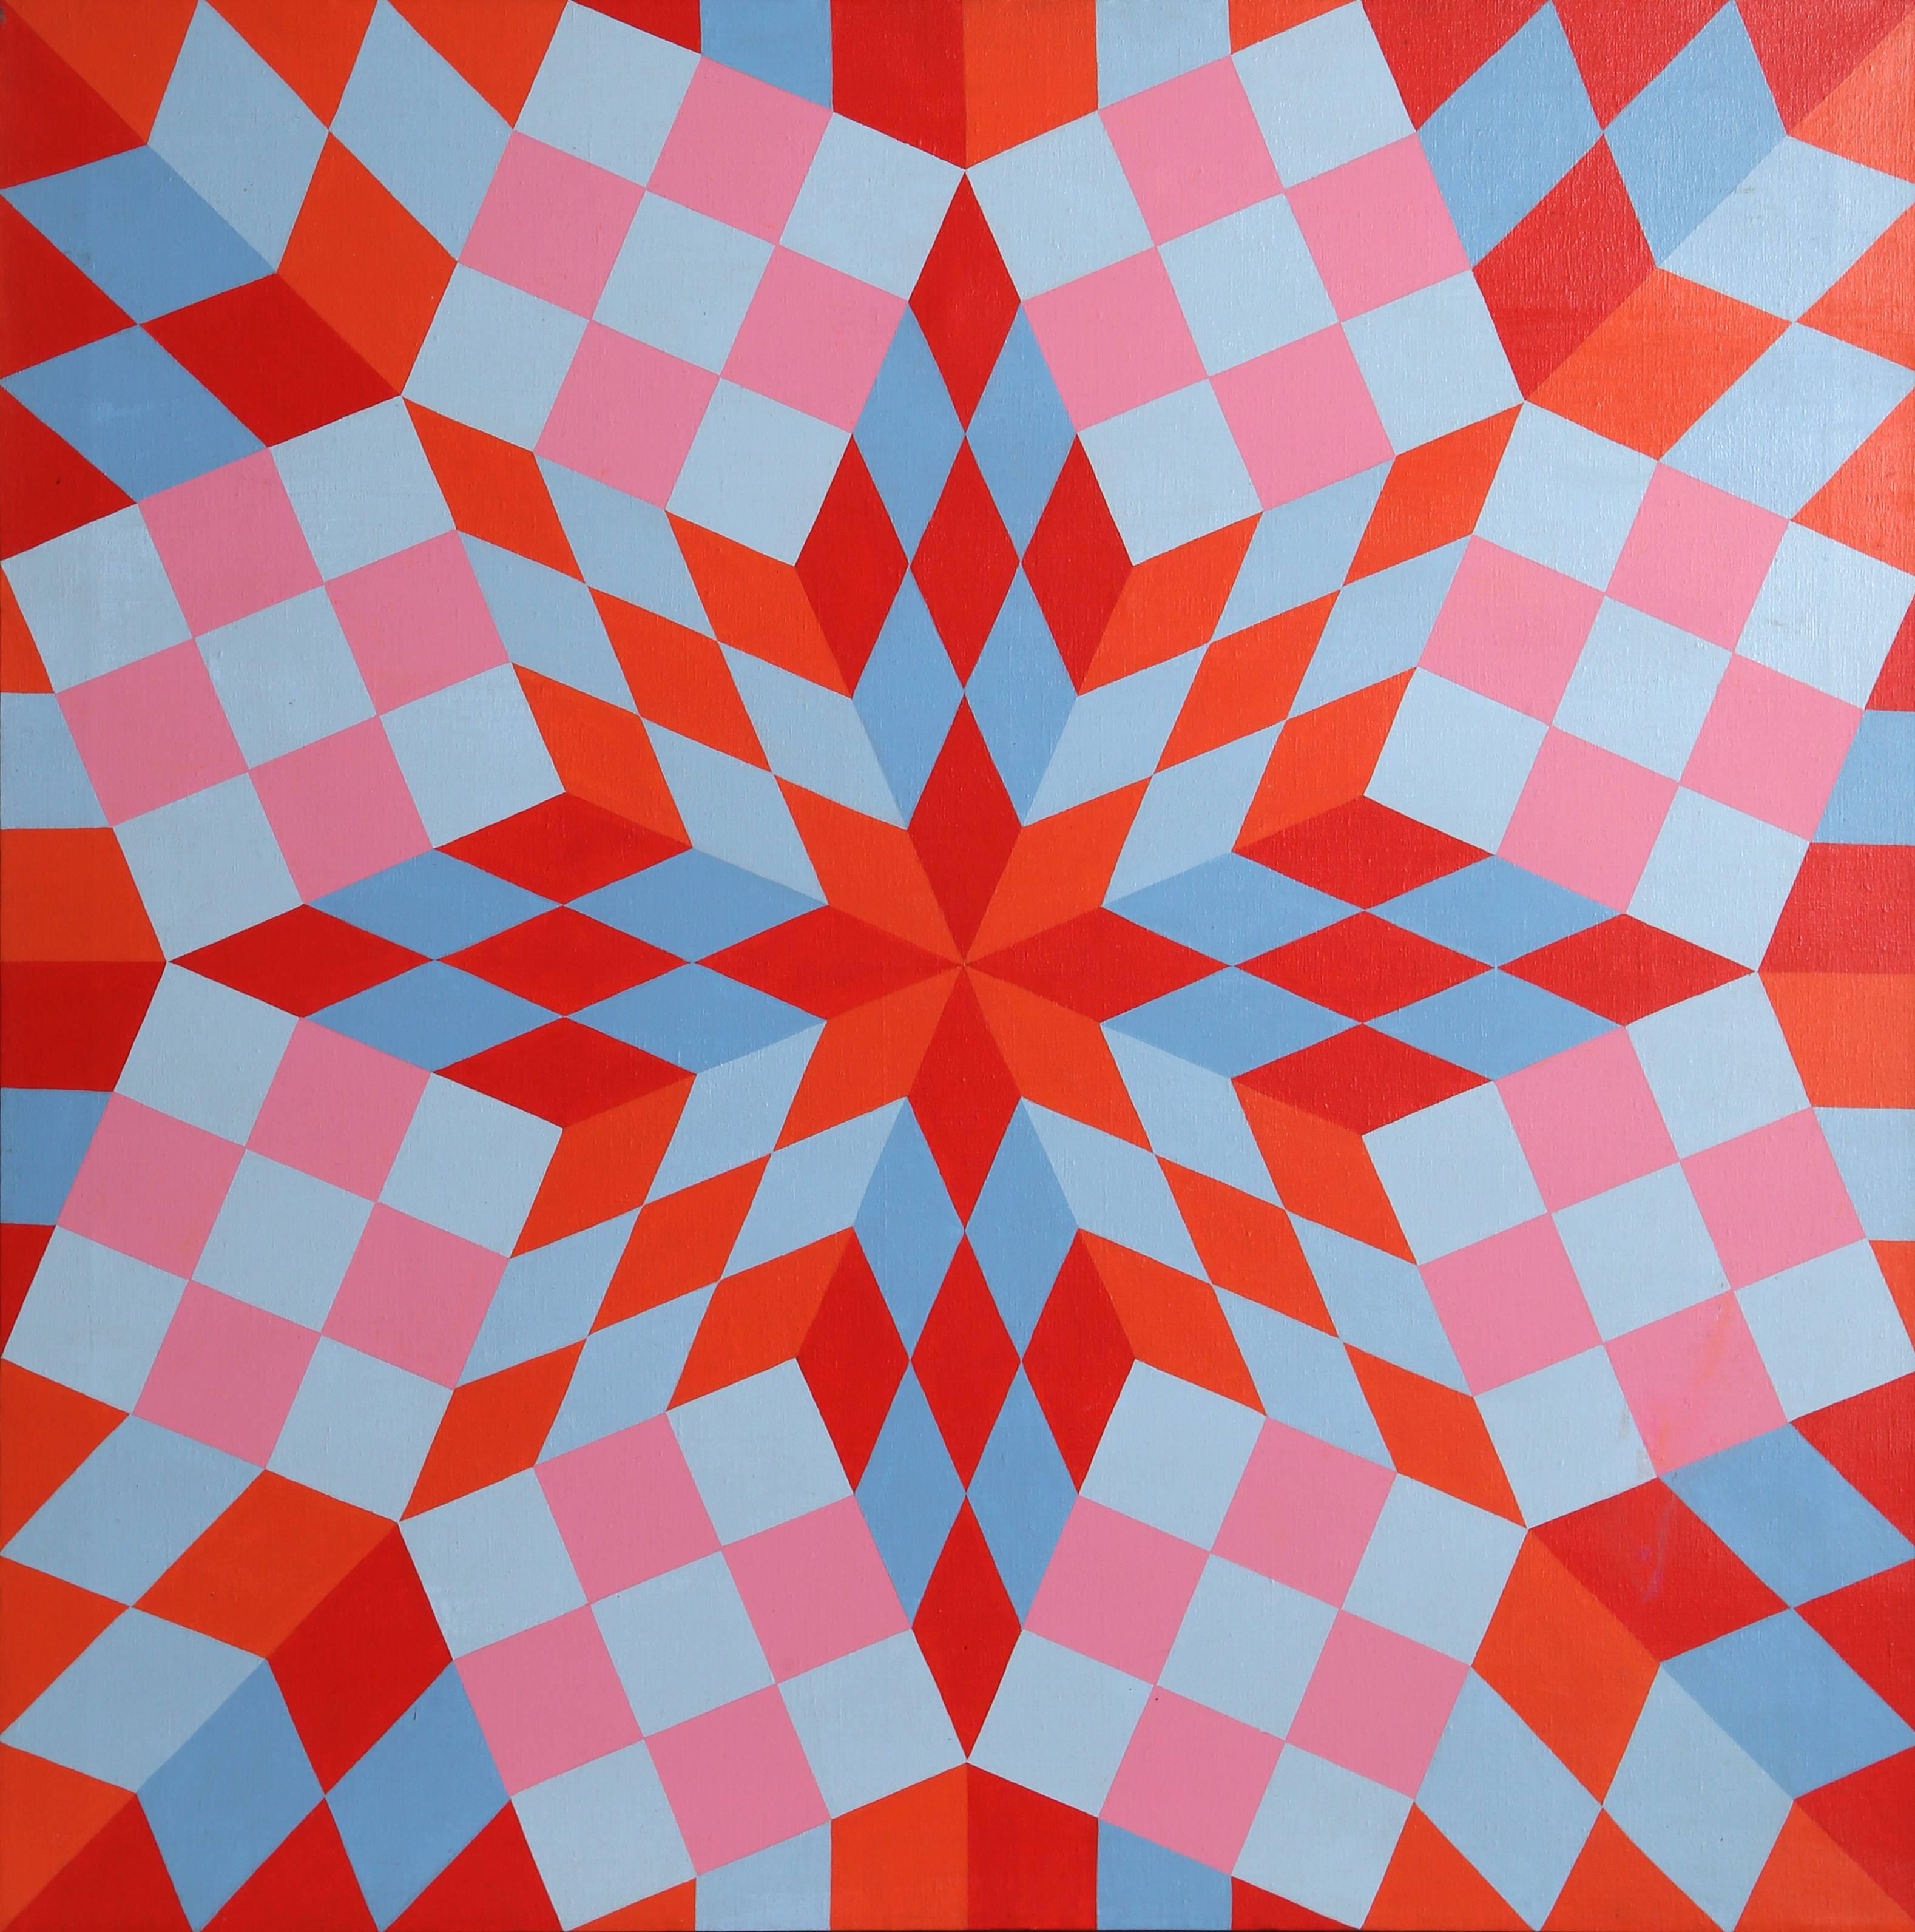 Megalopolis, OP Art Painting on Canvas by Roy Ahlgren